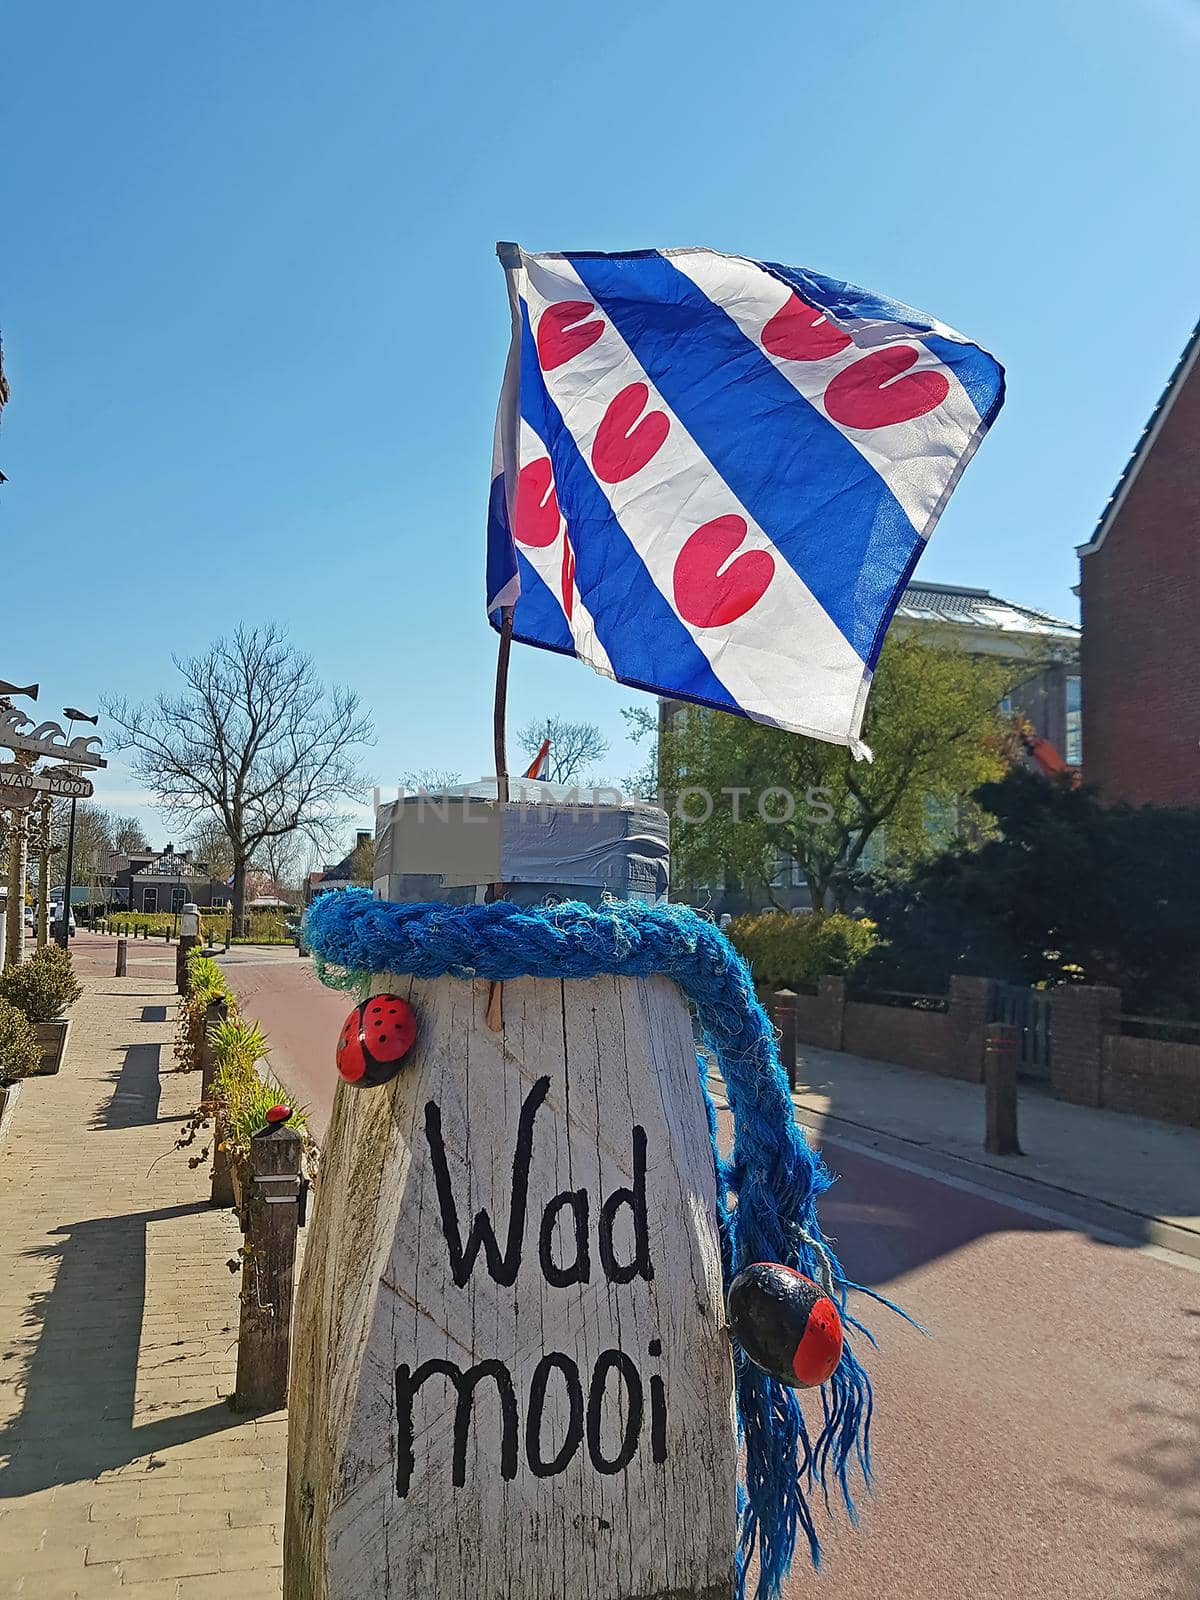 The frisian flag on a pole with the words 'Wad Mooi' by devy